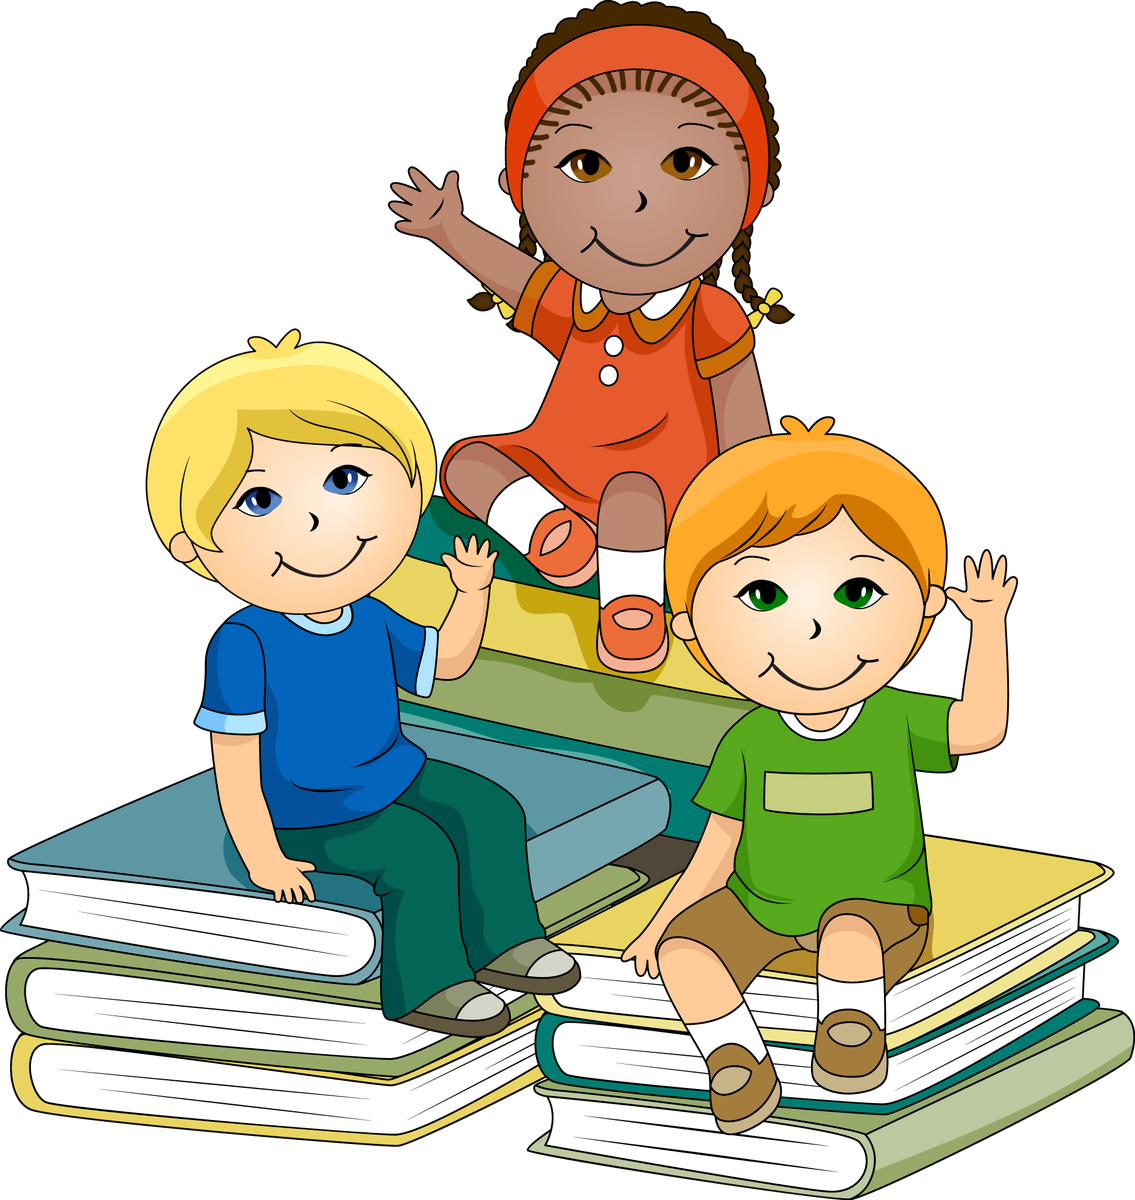 Injury clipart school. Our curriculum is the